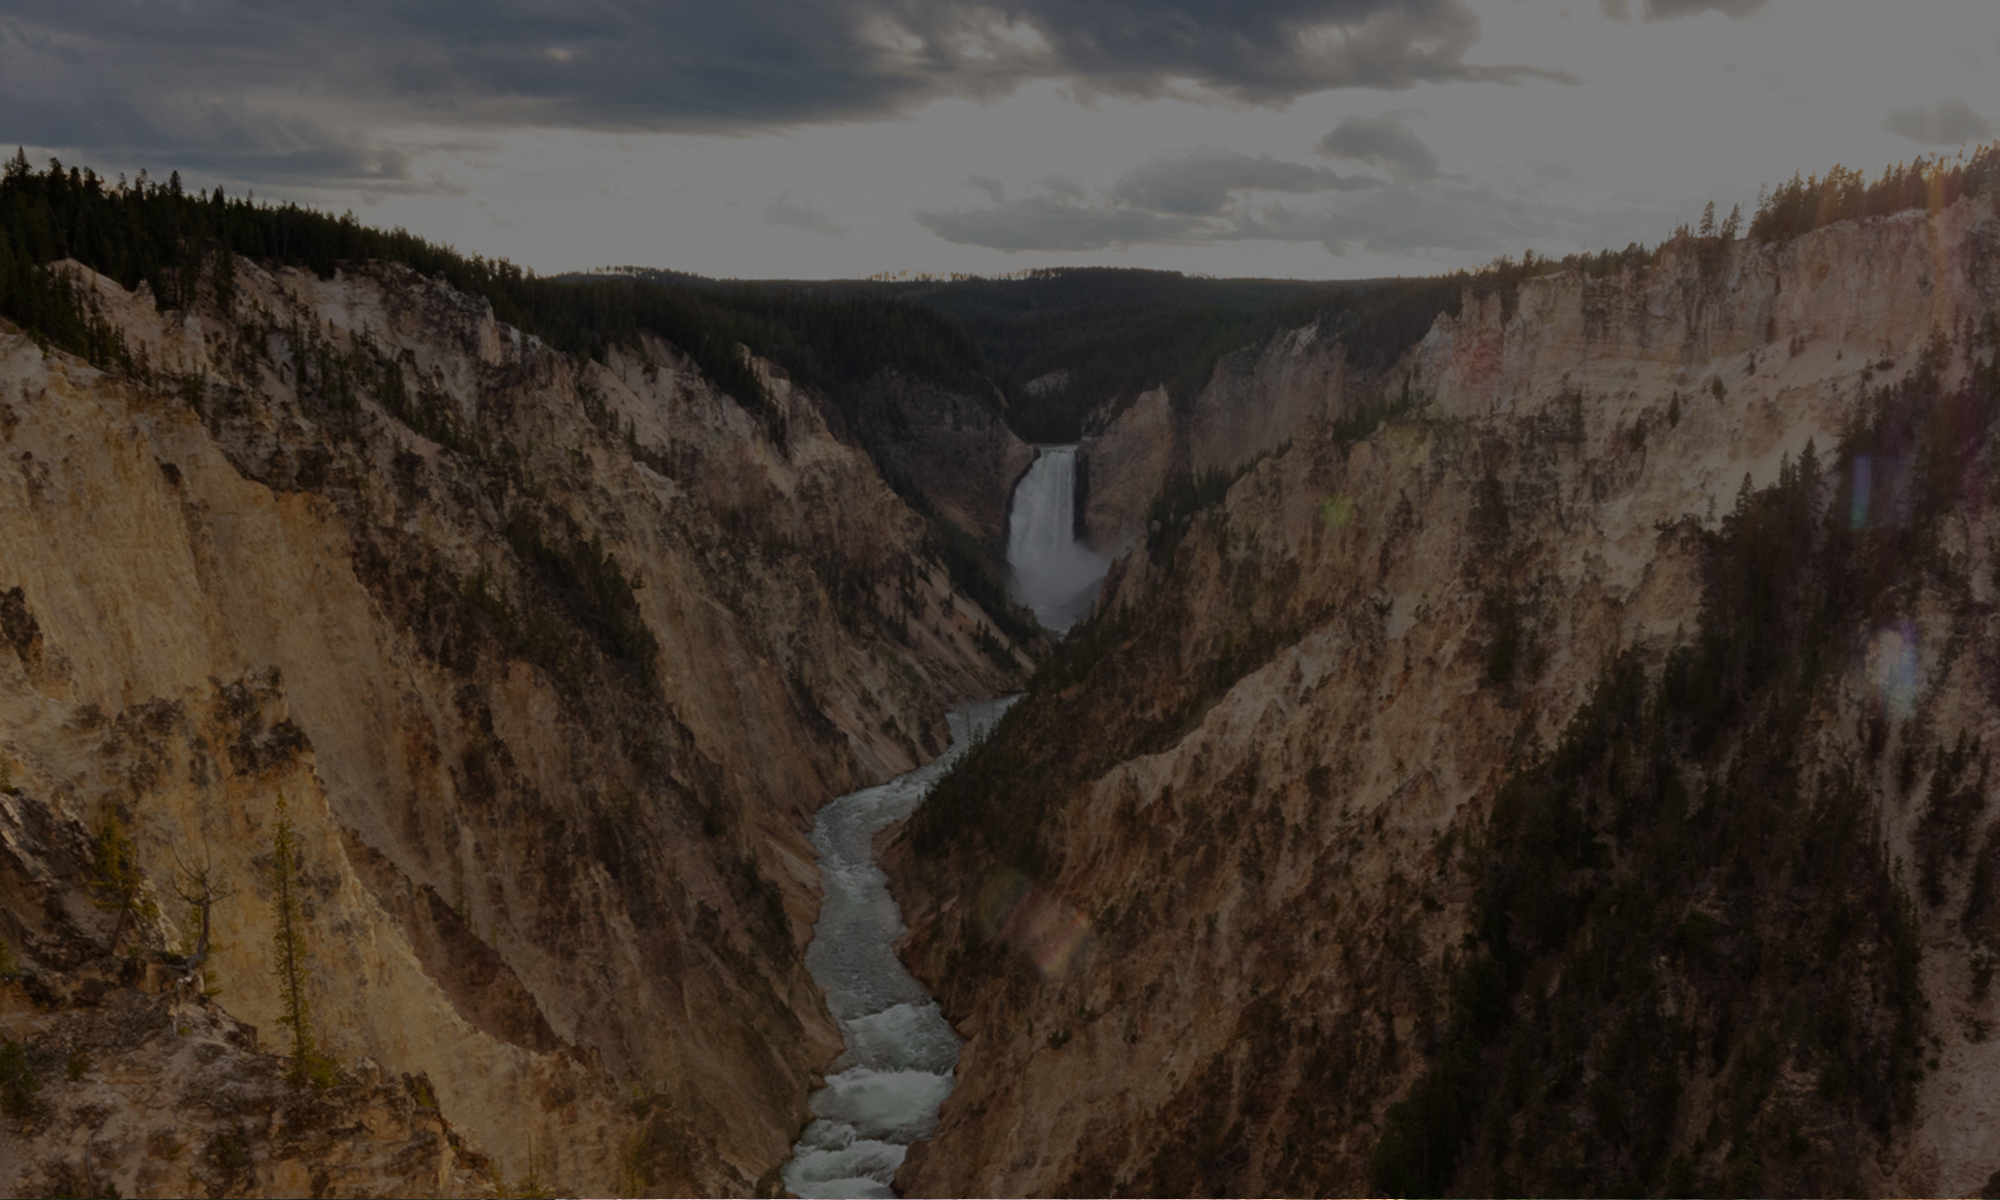 Powerful river water flowing in the Lower Falls of the Yellowstone National Park.